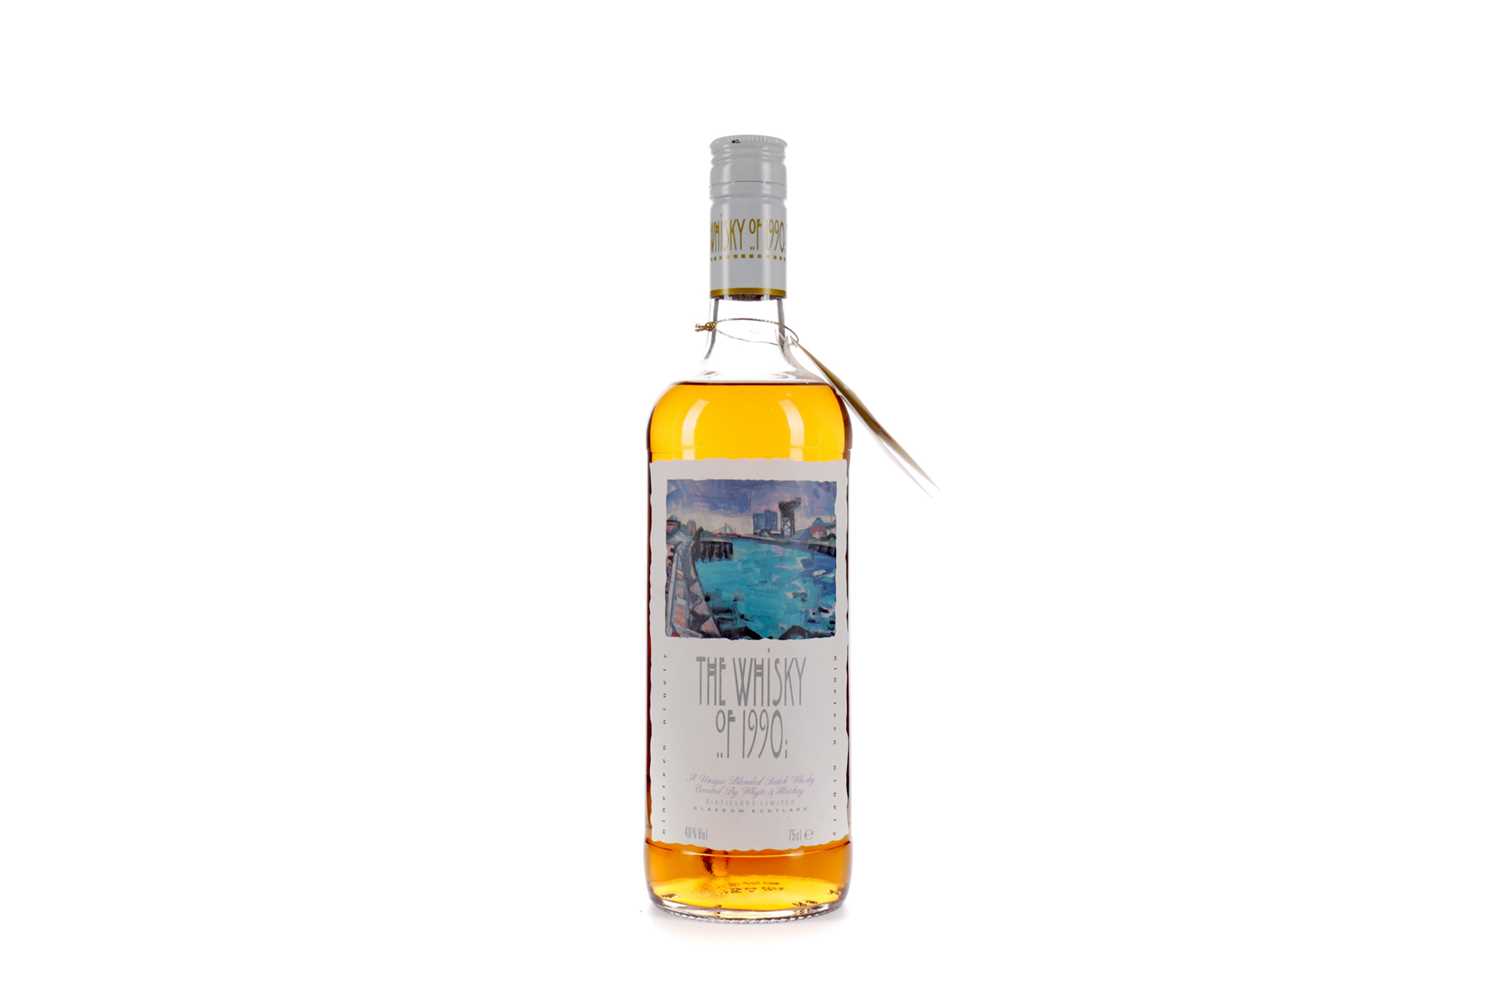 Lot 6 - WHISKY OF 1990